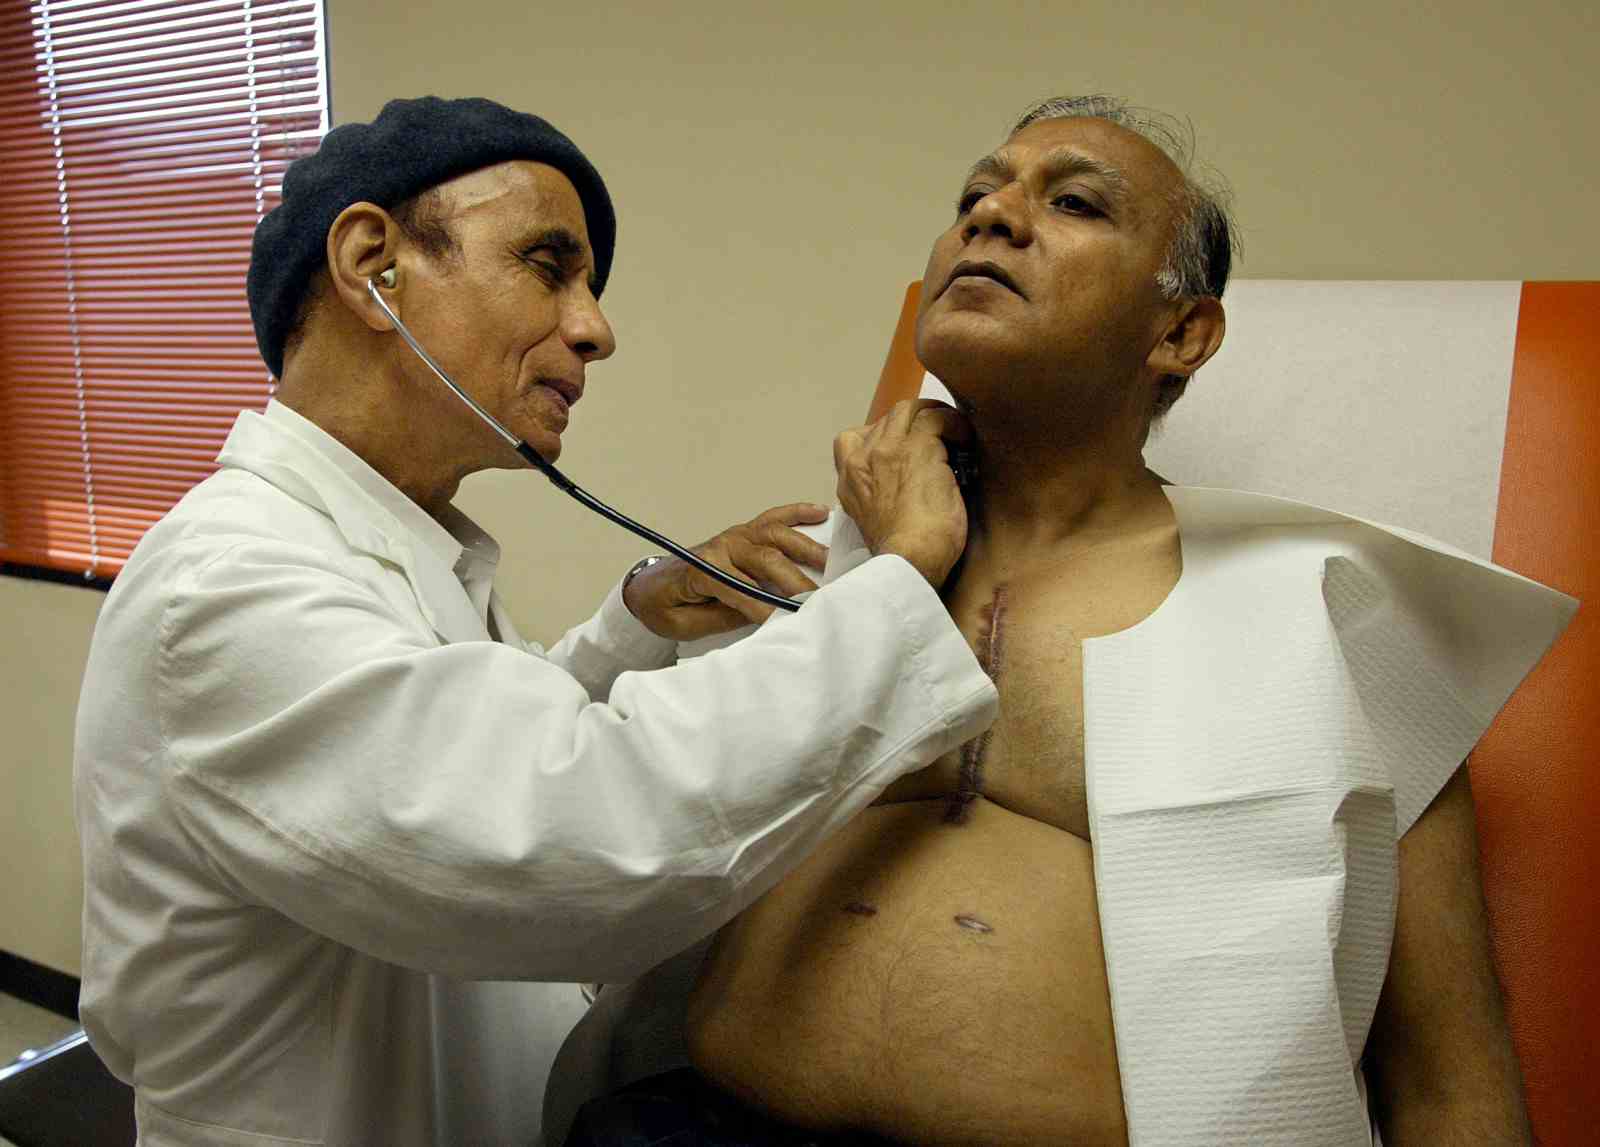 Dr. Moneim Fadali, cardiovascular and thoracic surgeon, examines patient Ahmed Muhnee during a heart and lung evaluation at his office in Los Angeles (Mel Melcon/Los Angeles Times via Getty Images)